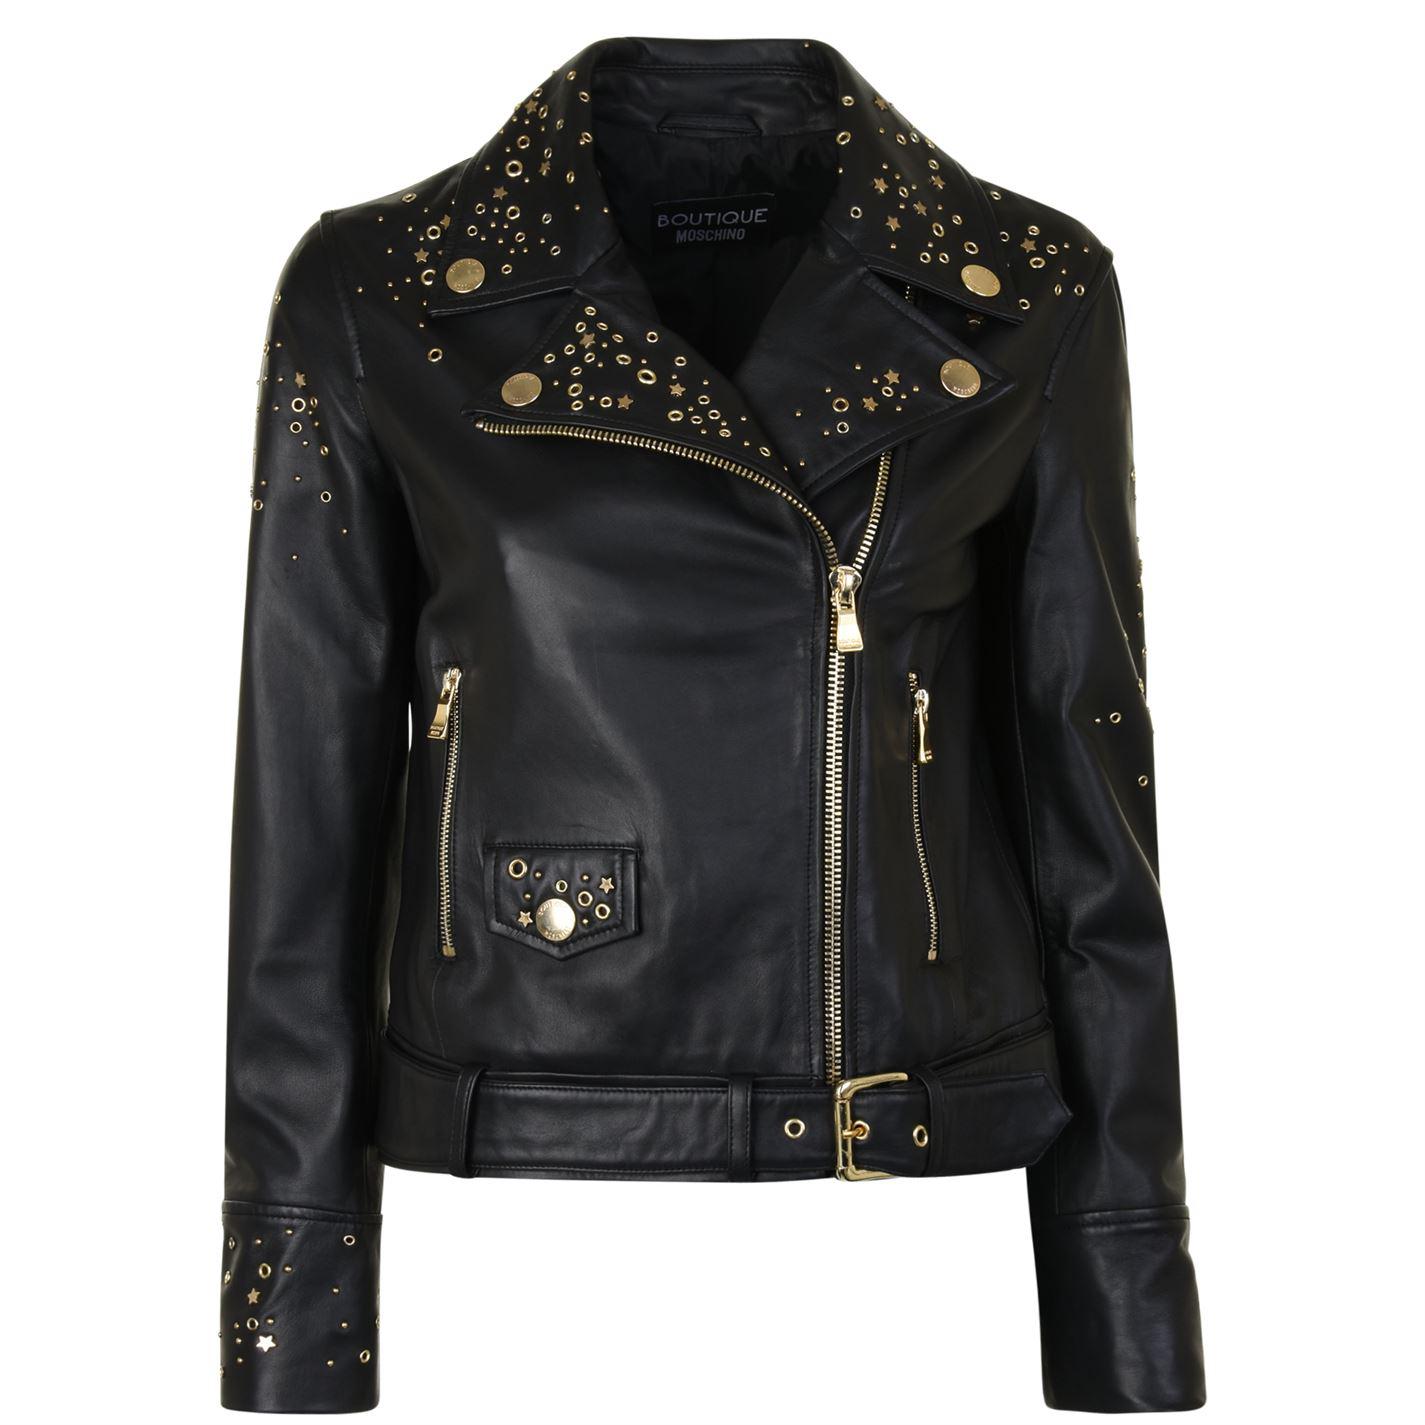 Boutique Moschino Star Studded Leather Jacket in Black - Lyst